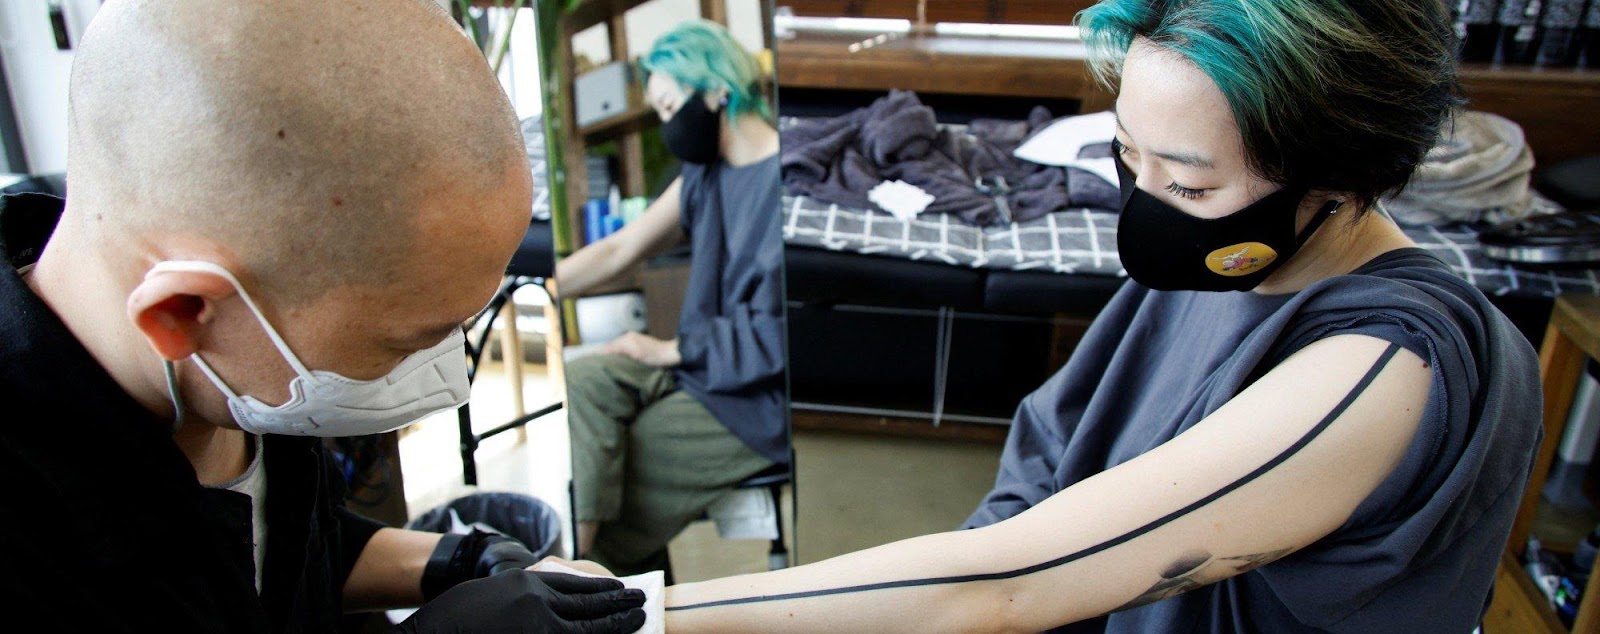 South Korean tattoo artists draw hope as presidential candidate floats  legalisation | South China Morning Post